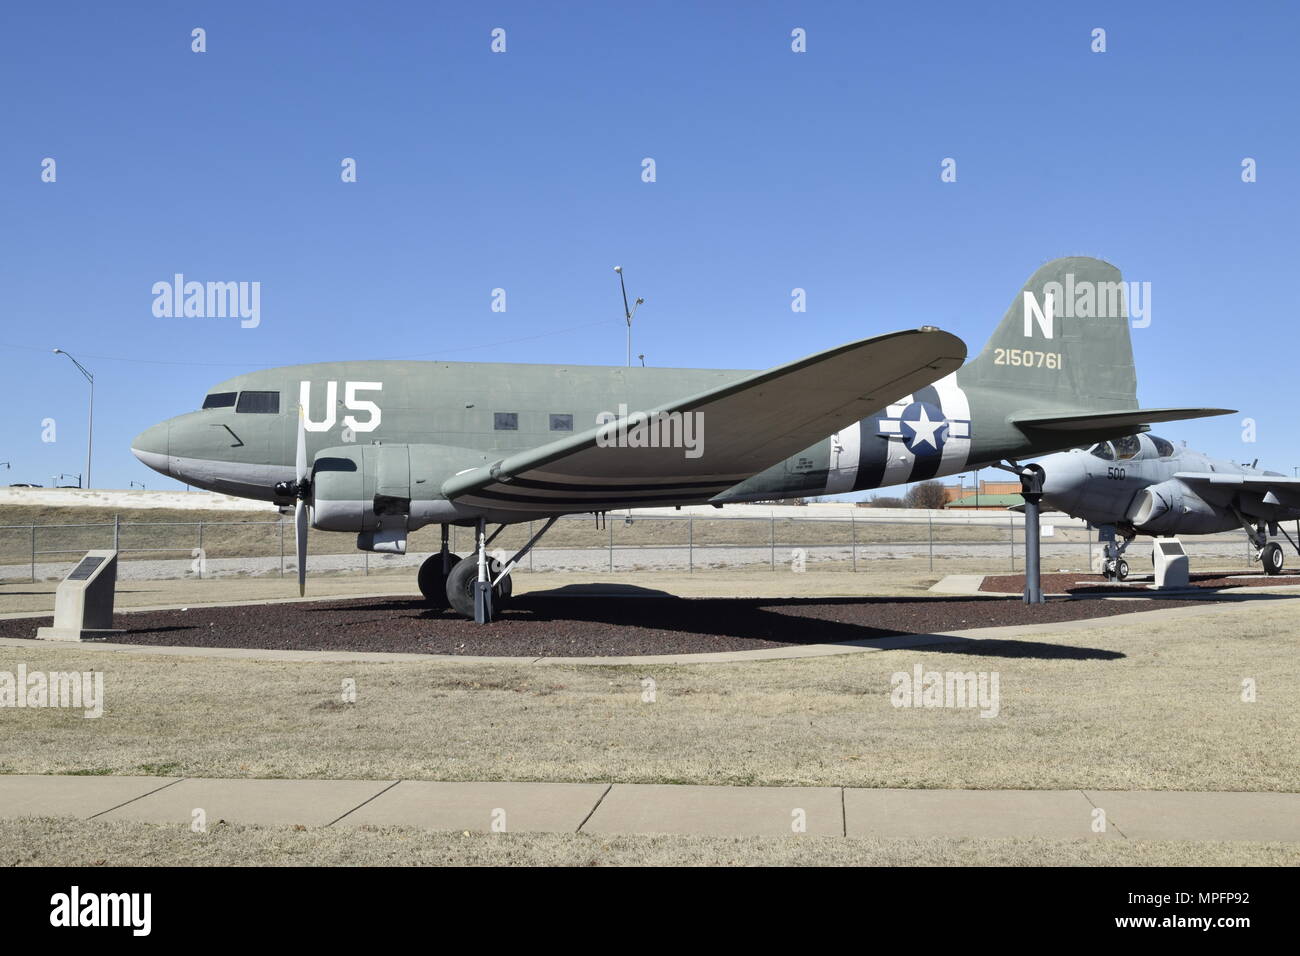 Douglas C-47A Skytrain on display in the Charles B. Hall Memorial Air Park on Feb. 16, 2017, Tinker Air Force Base, Oklahoma. The Douglas aircraft production facility produced 5,231 C-47s in Oklahoma City on what eventually became Tinker Air Force Base. (U.S. Air Force photo/Greg L. Davis) Stock Photo